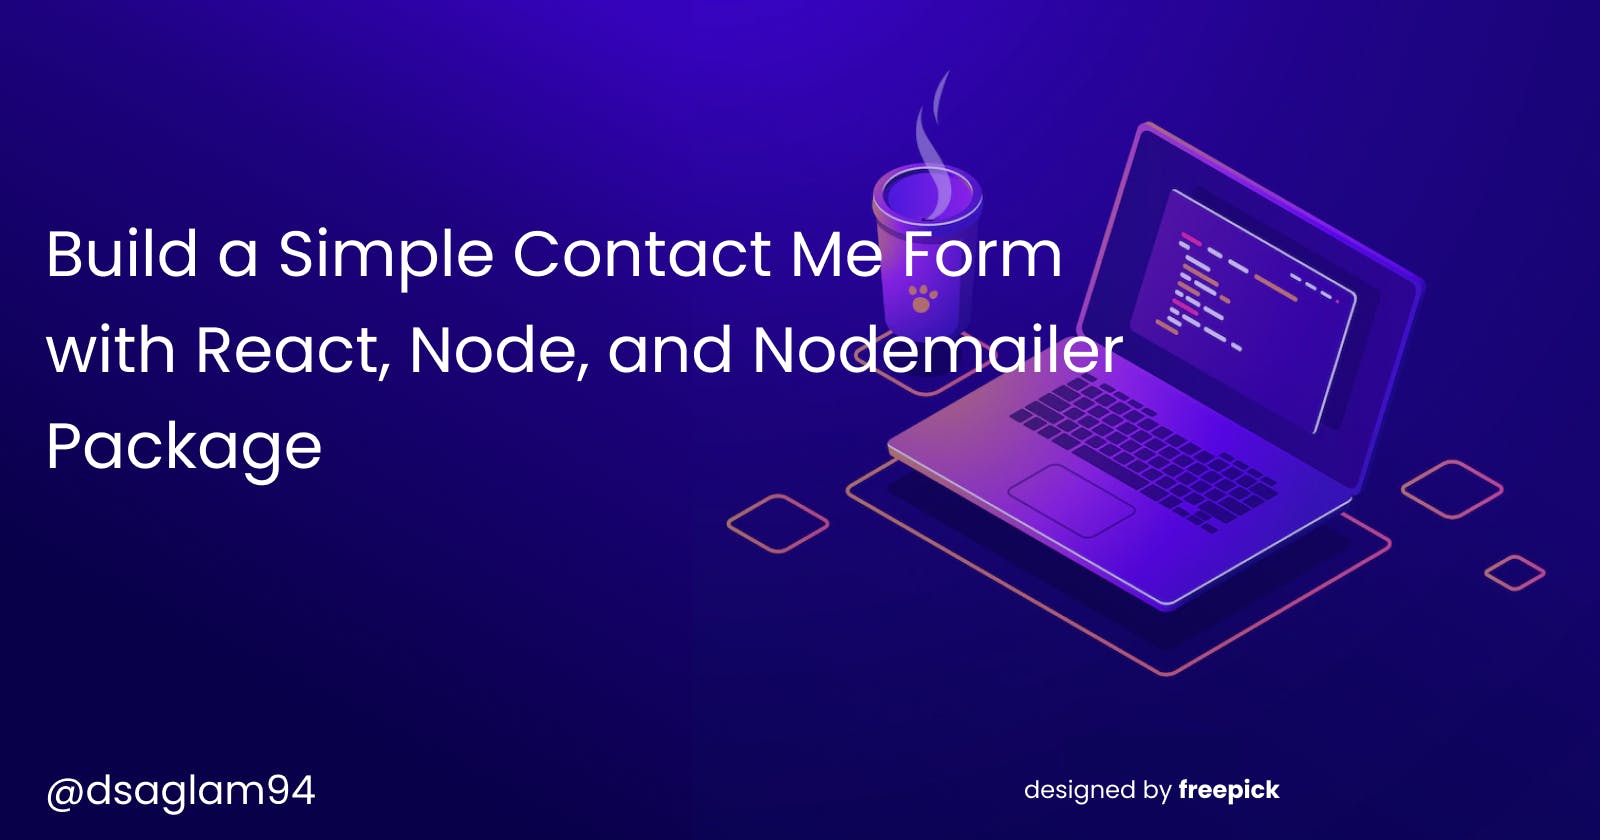 Build a Simple Contact Me Form with React, Node, and Nodemailer Package